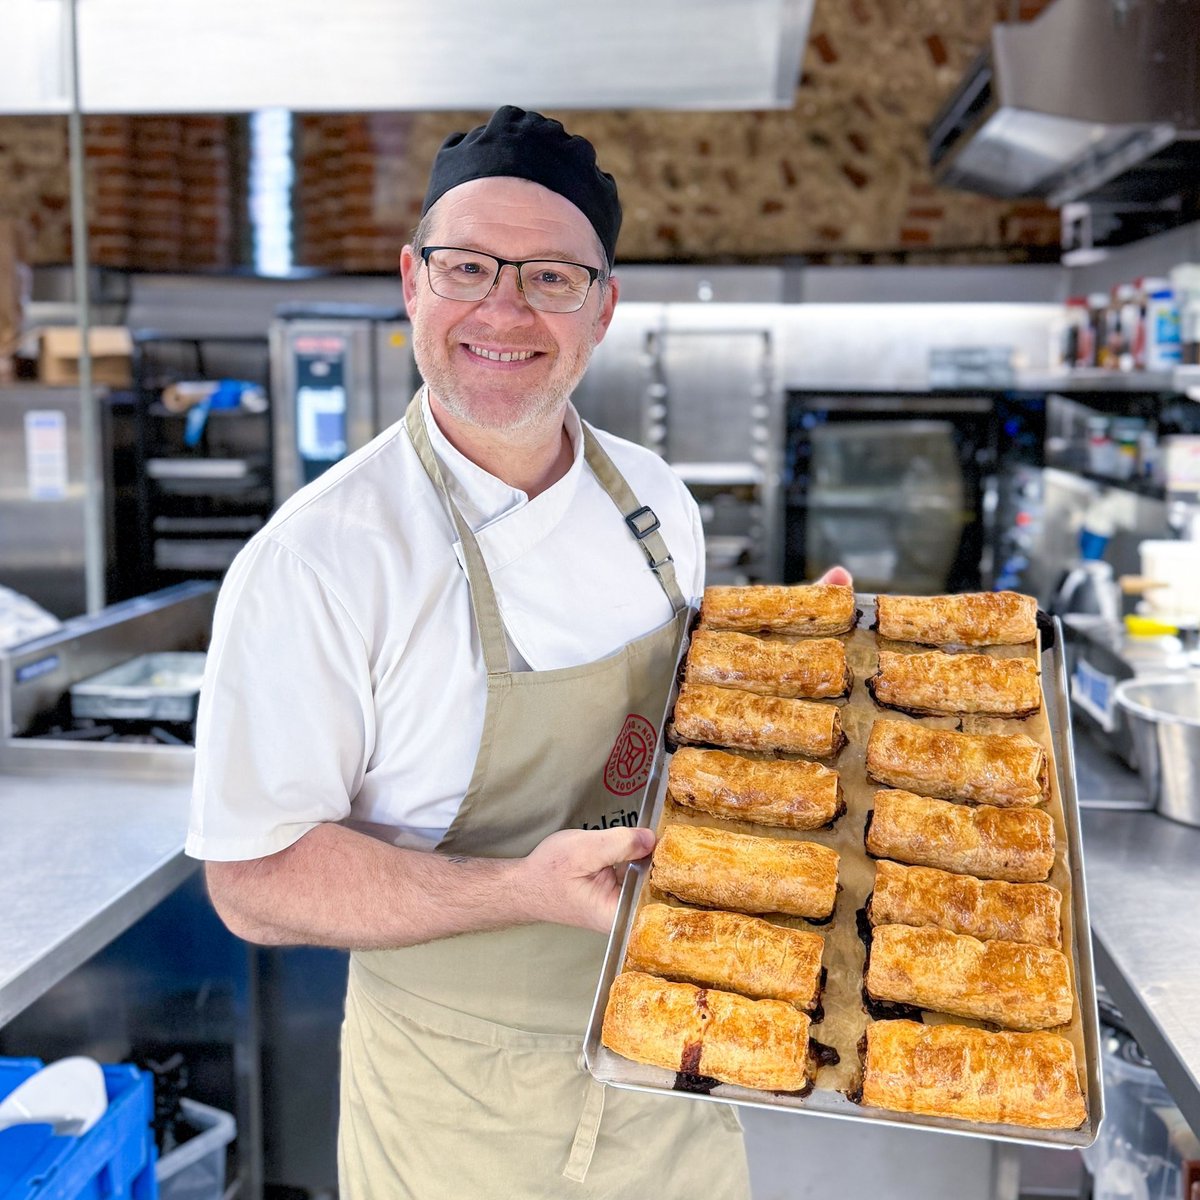 Fresh out of the oven!! Our award winning sausage rolls are the perfect treat for a quick lunch or a very tasty snack!! Why not stop by our farm shop or browse our website today and try our champion sausage rolls for yourself!! We promise they won't disappoint! #NorfolkProduce